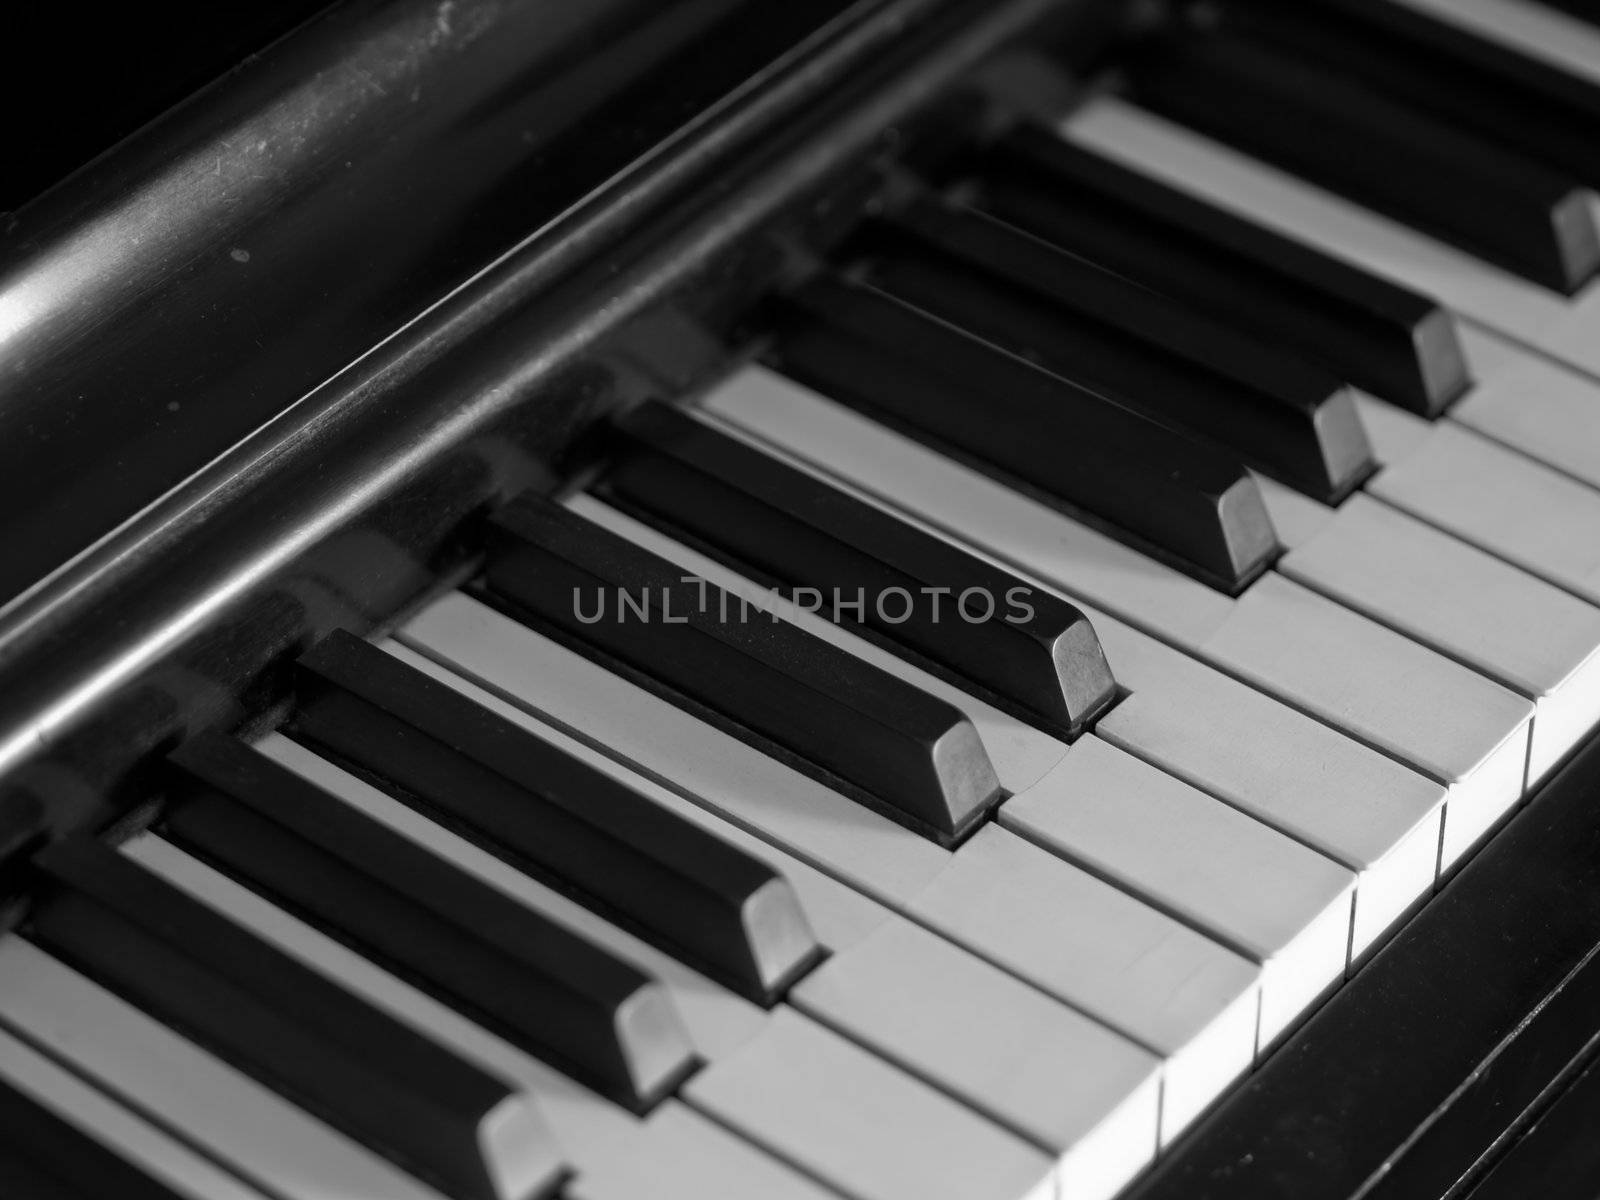 Piano keys of a very well loved and often played piano in monochrome Black and Whit